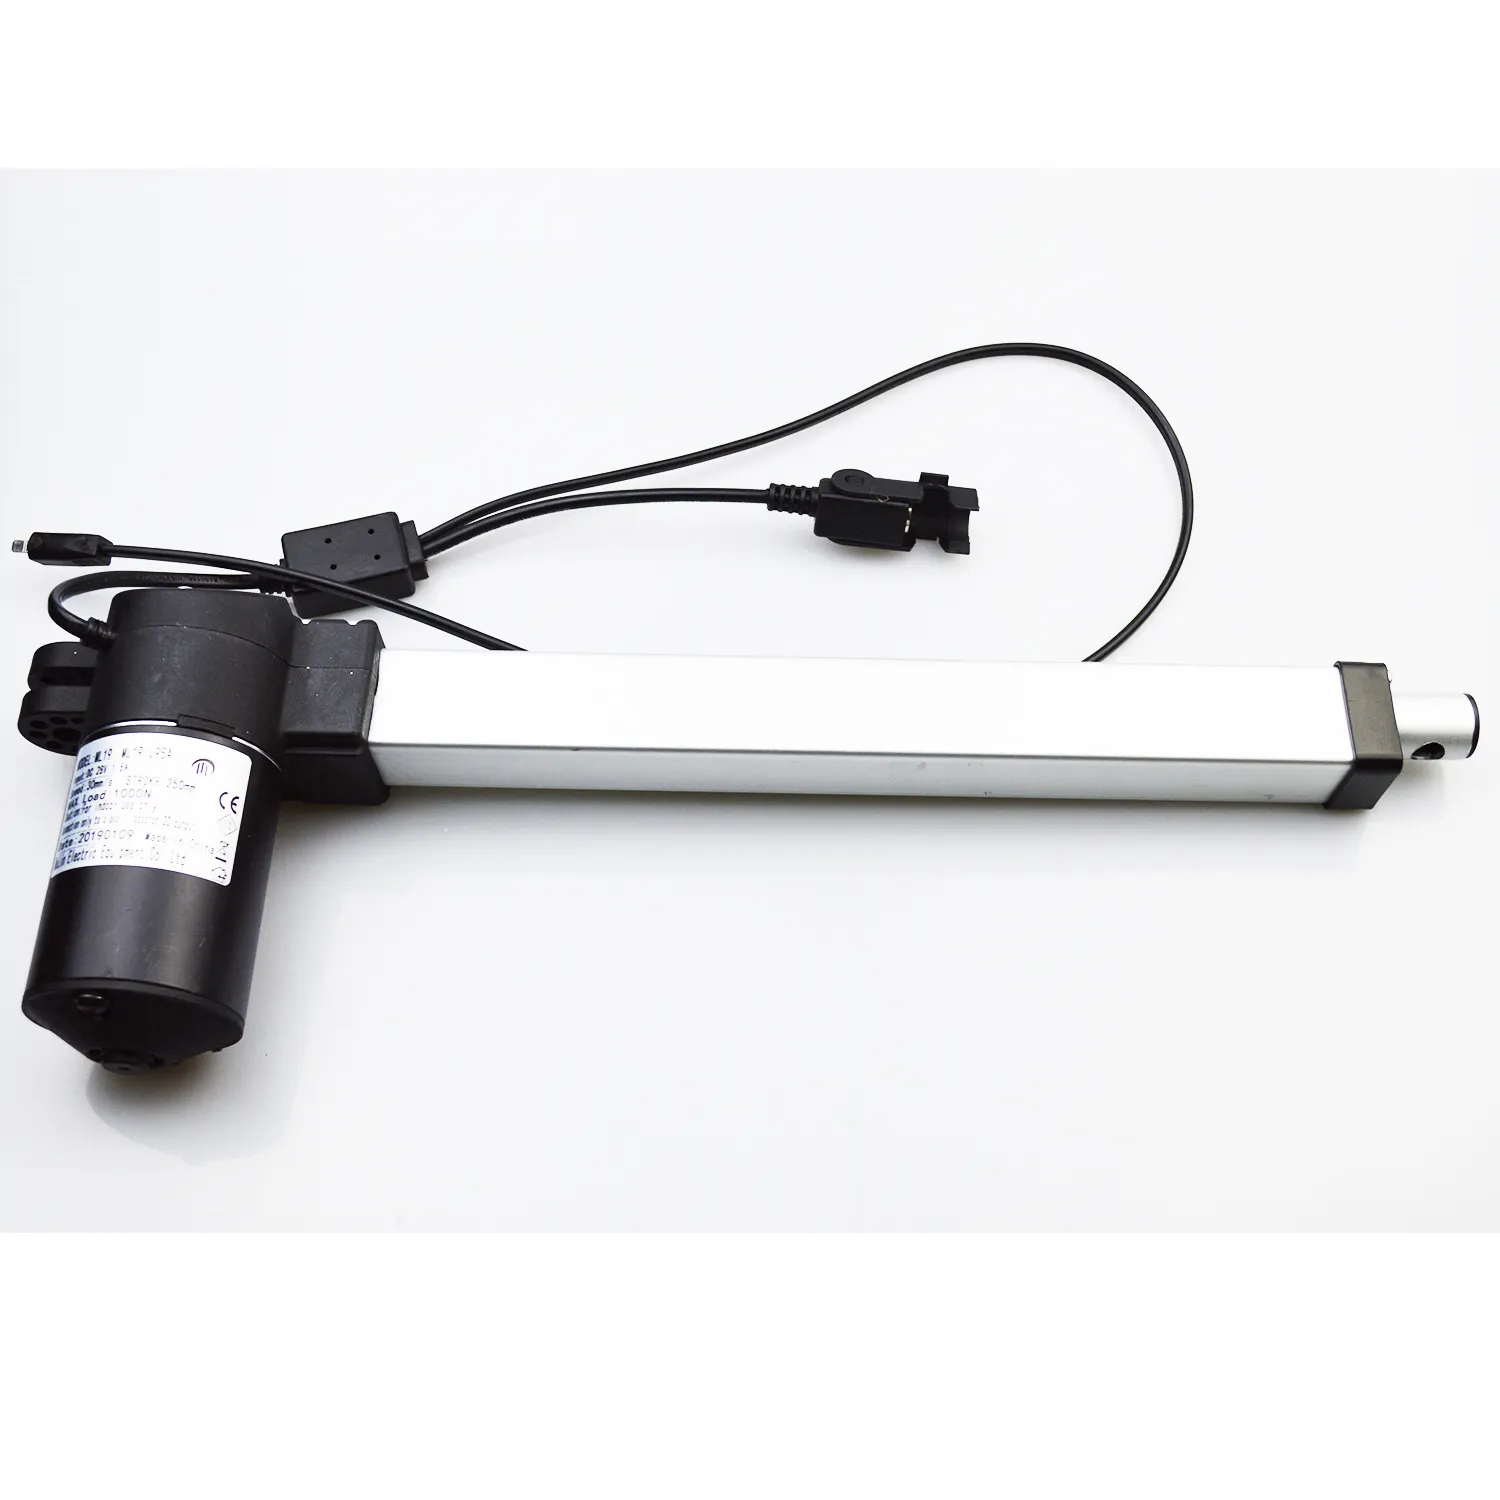 High speed 29 volt electric linear actuator for adjustable bed motors and recliner chair